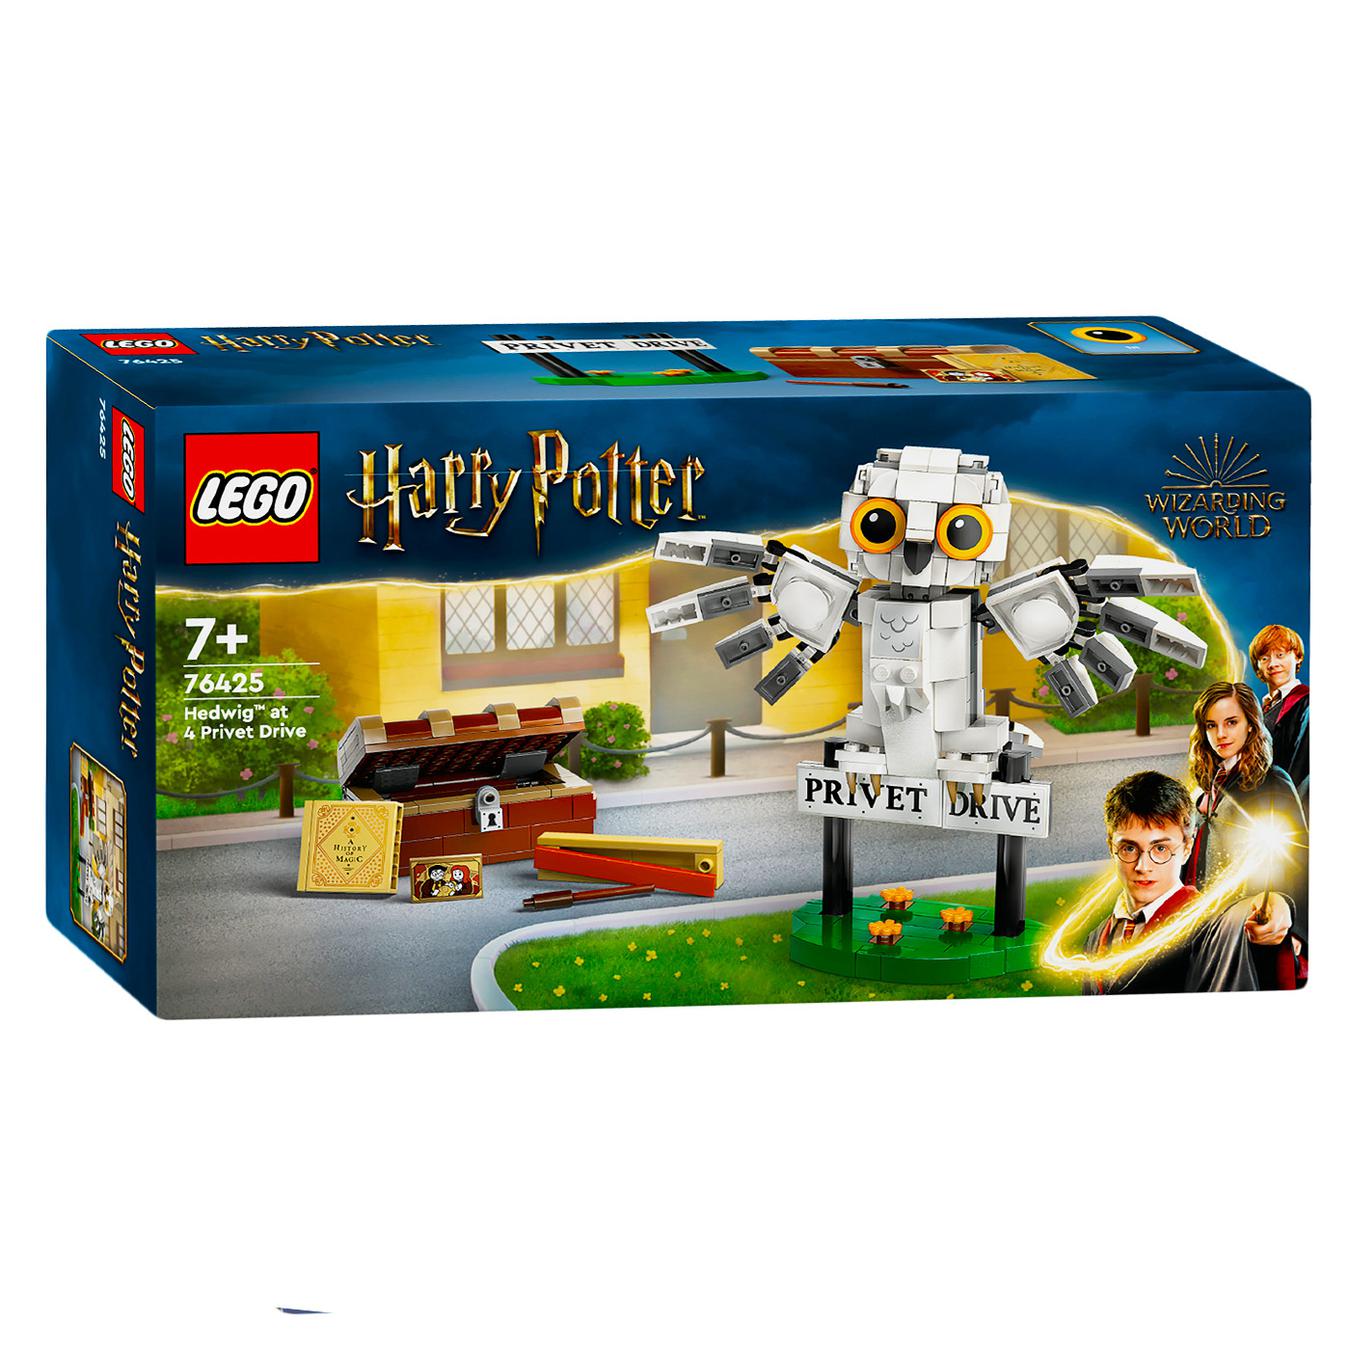 LEGO Harry Potter 76425 Hedwig and Privet Drive